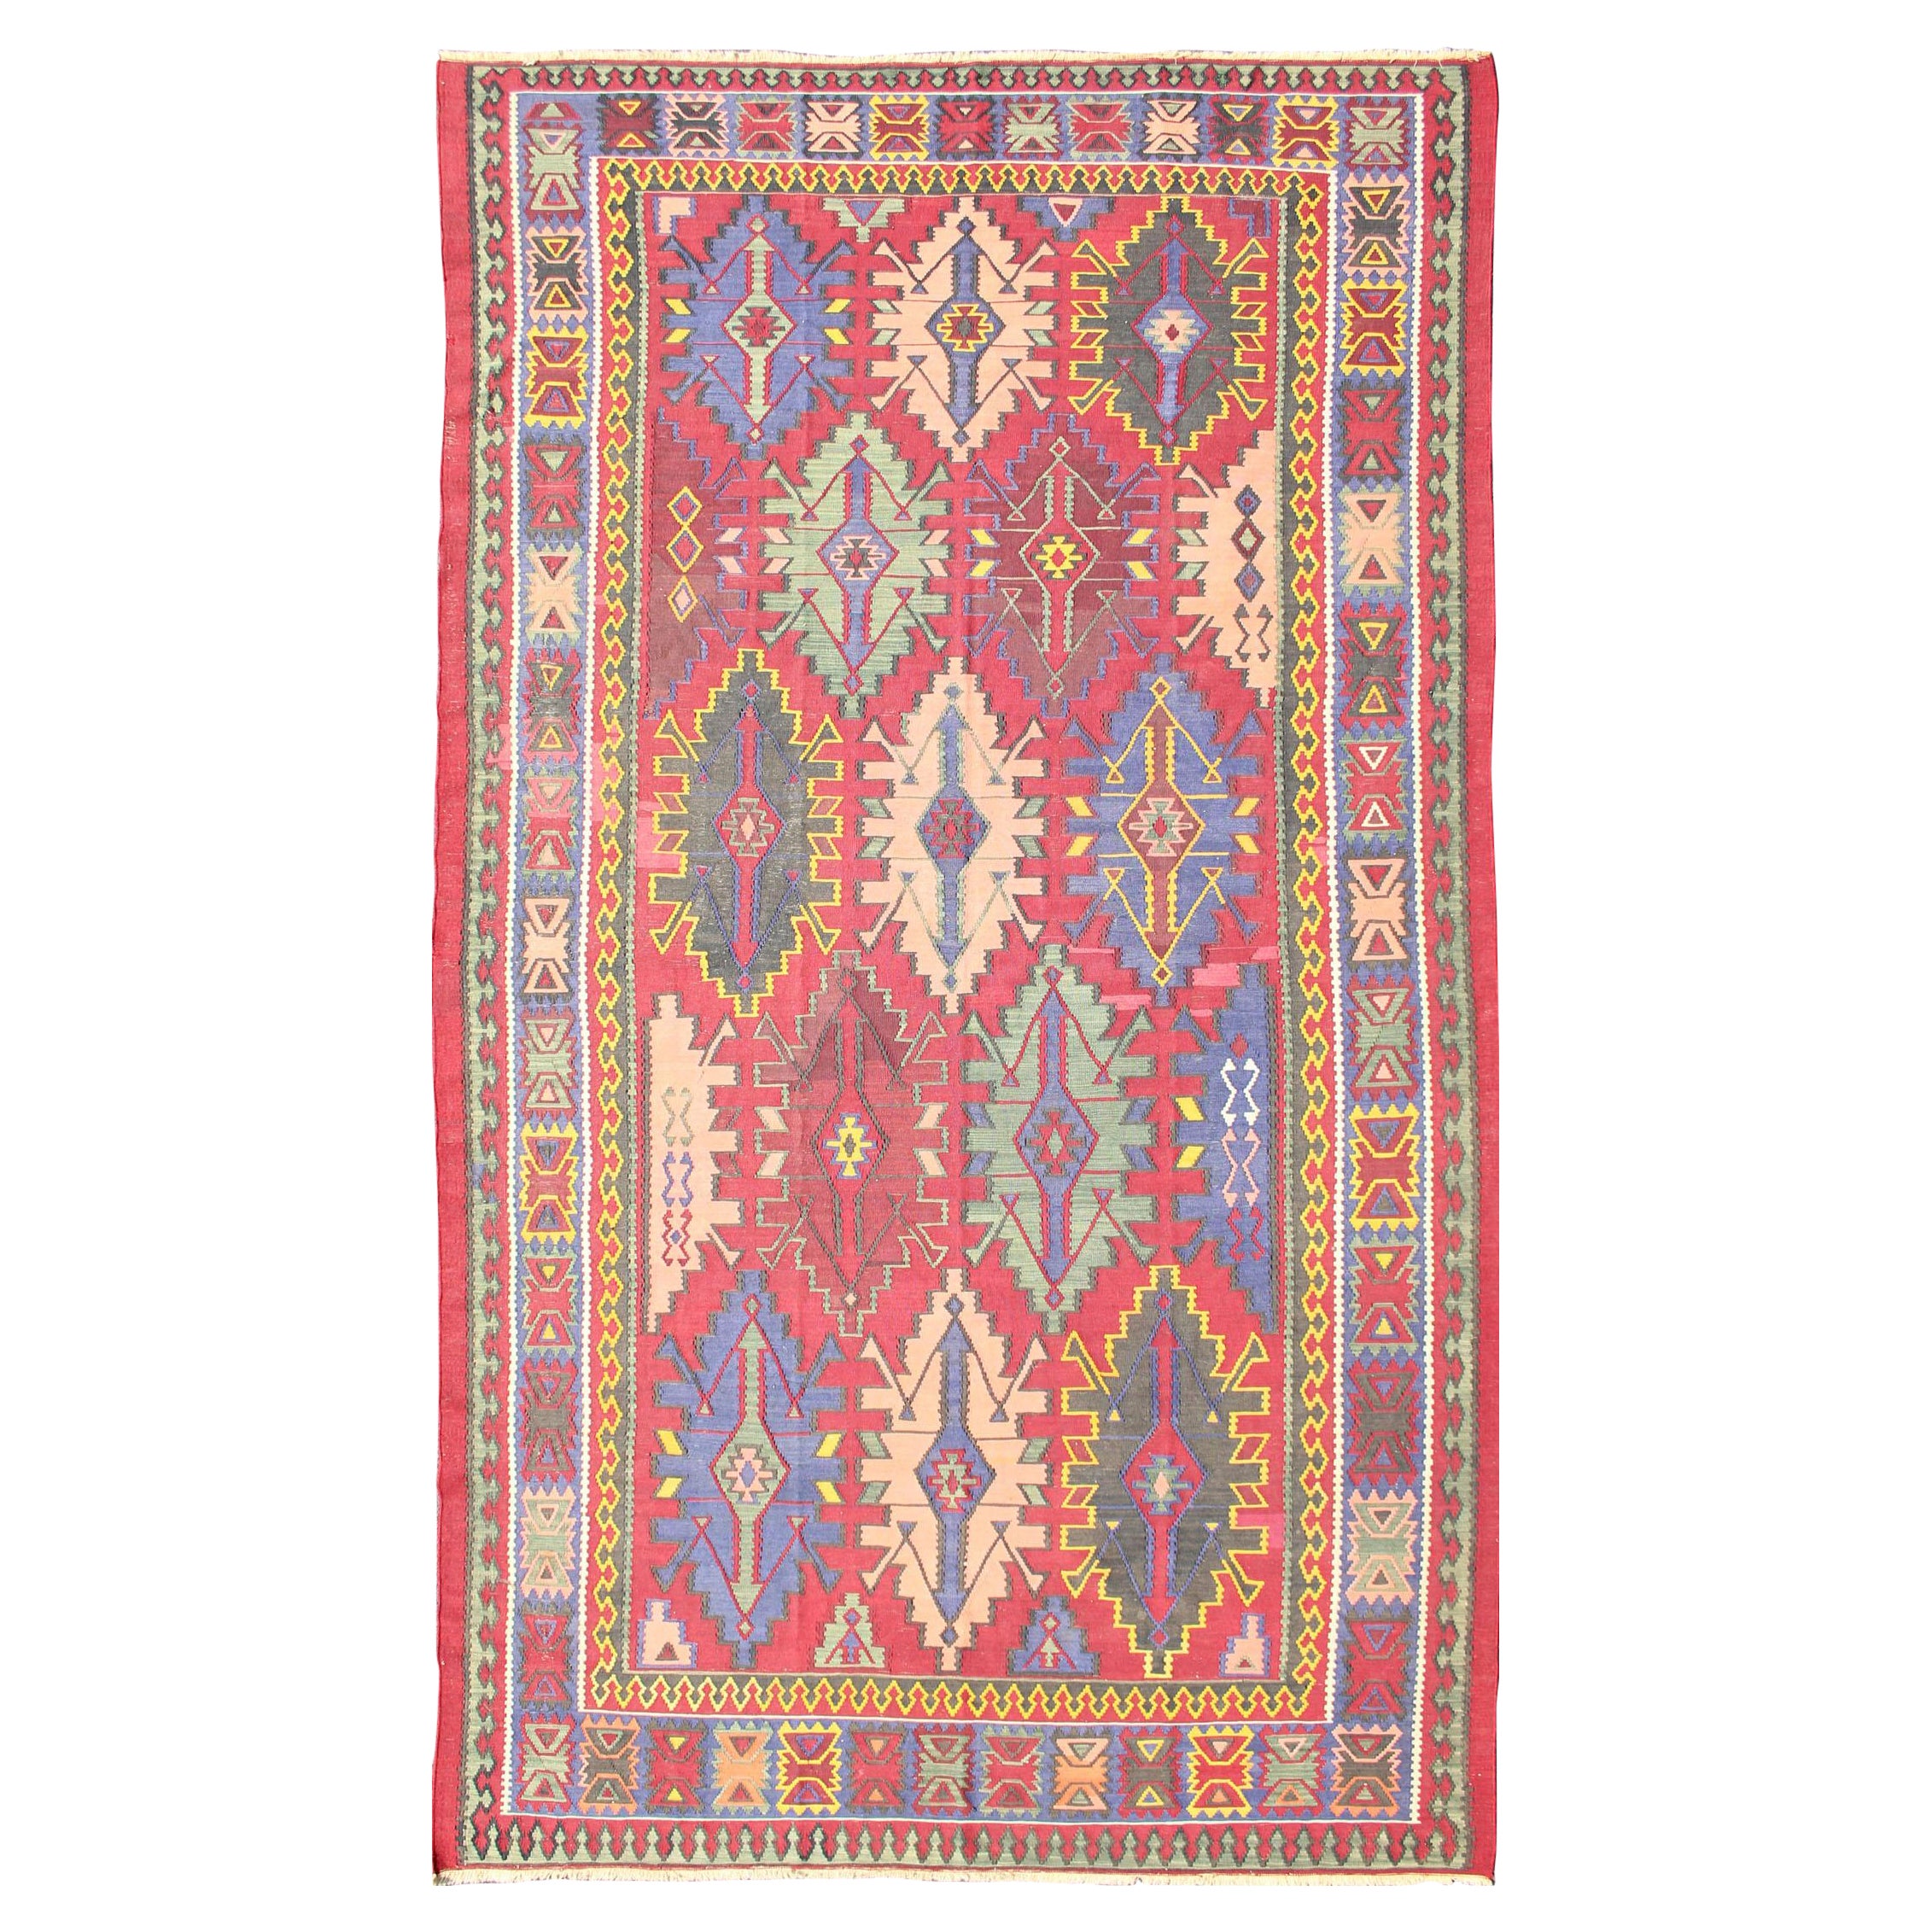 Antique Caucasian Avar Tribal Flat-Weave Gallery Rug Size in Multi Colors